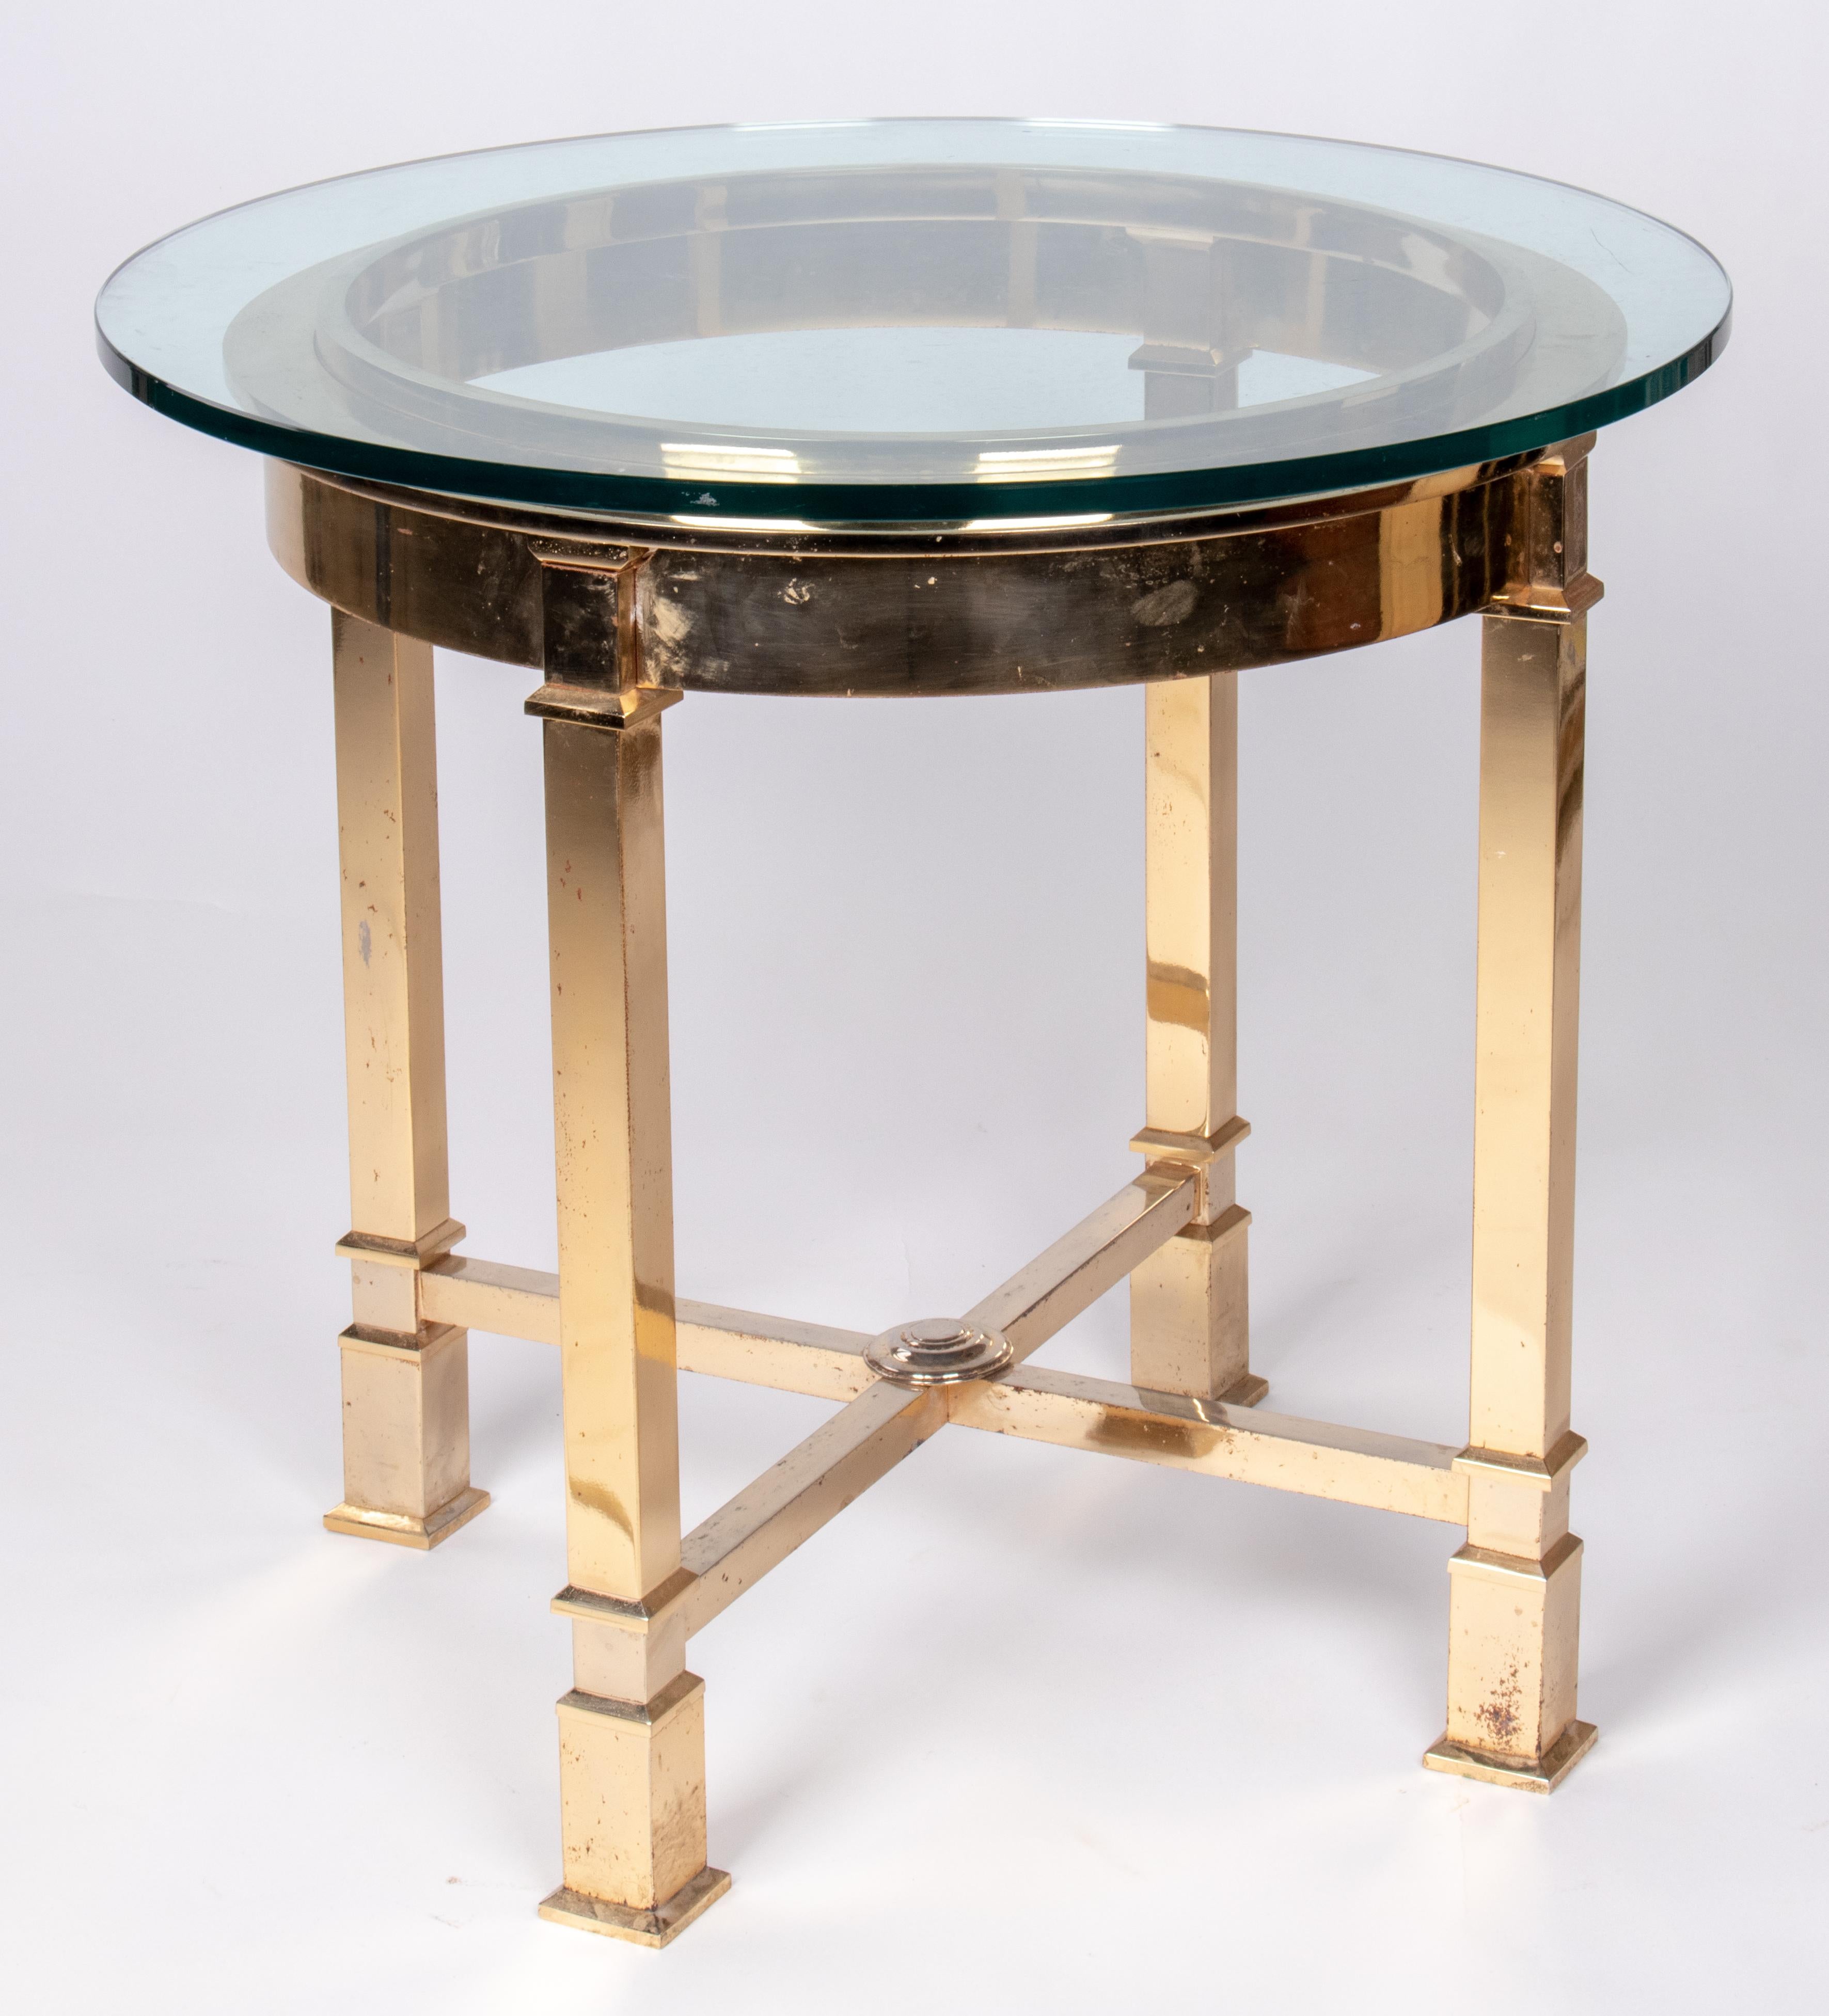 1970s classical Italian design gilded brass round auxiliary table, 60cm diameter with a glass top.
  